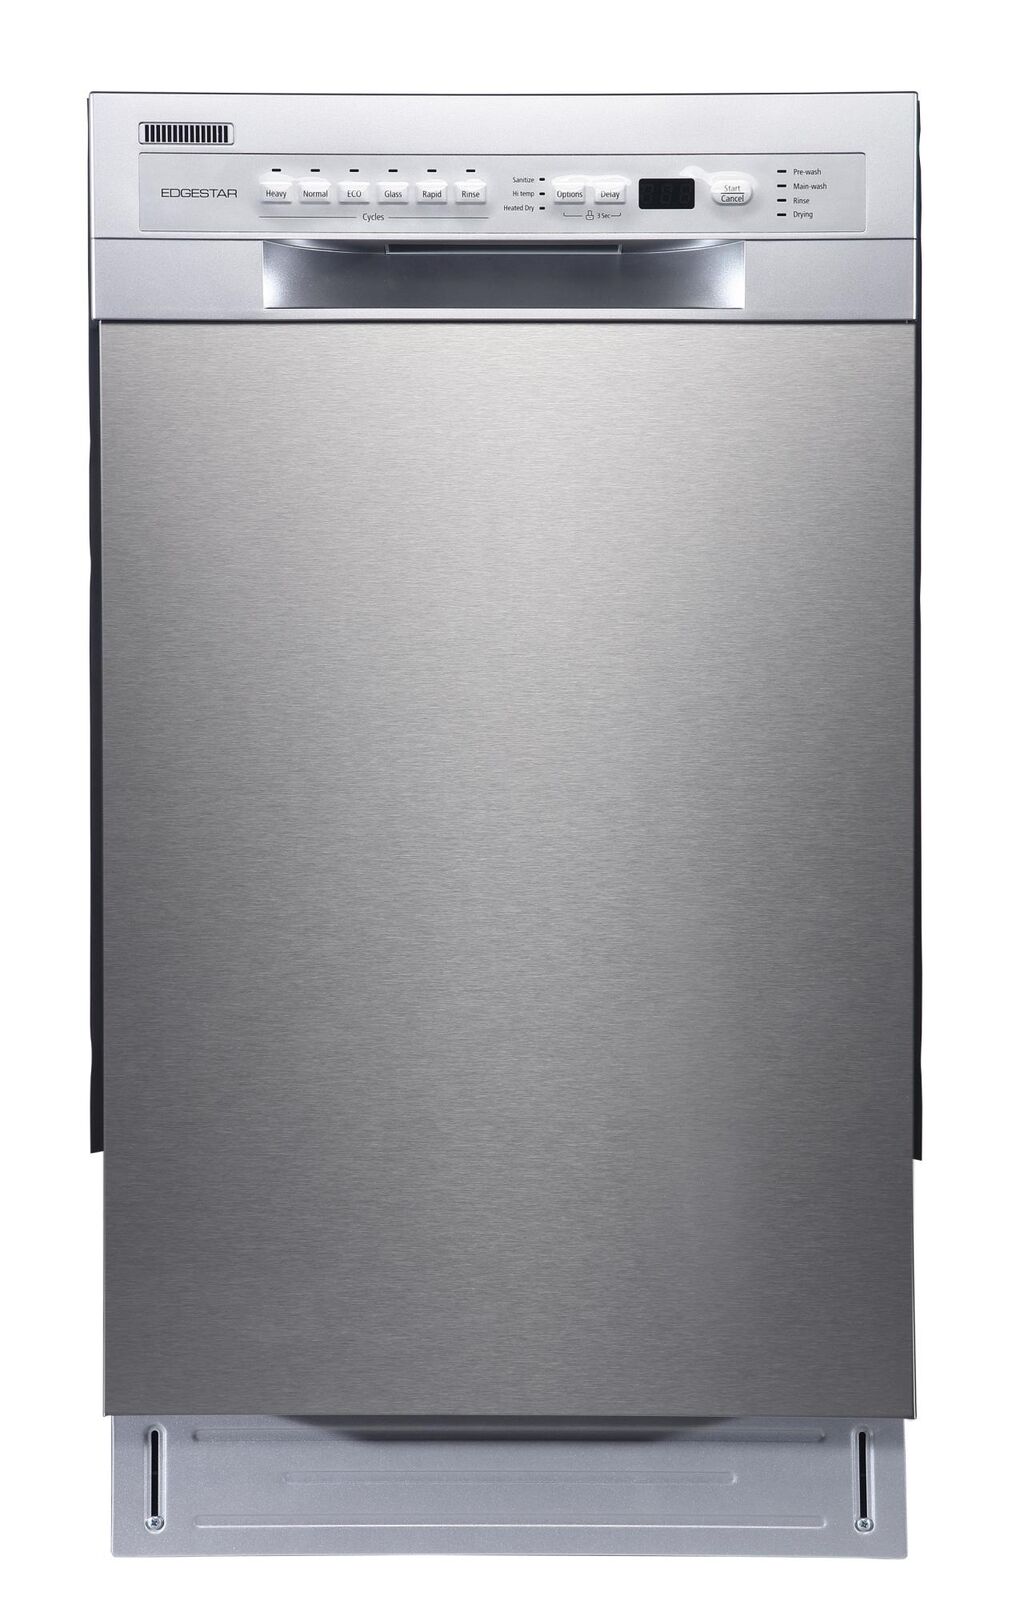 Edgestar Bidw1802 18"w 8 Place Setting Energy Star Rated Built-in - Stainless